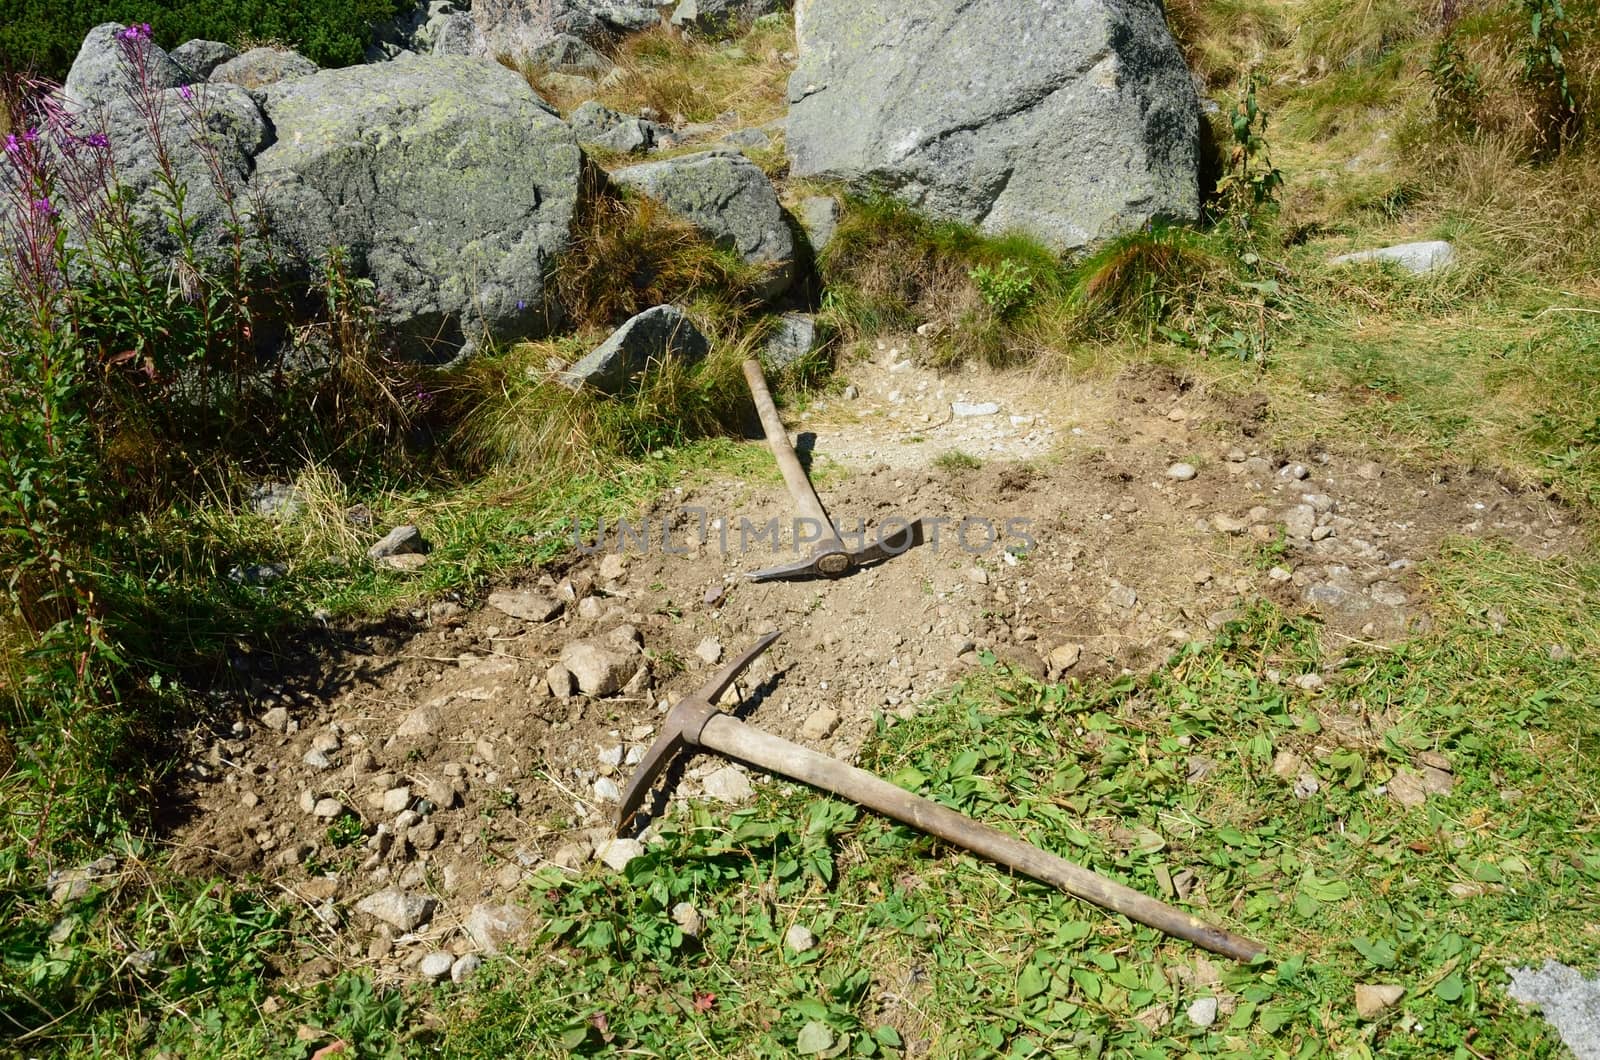 Old Pick axes in rocky area